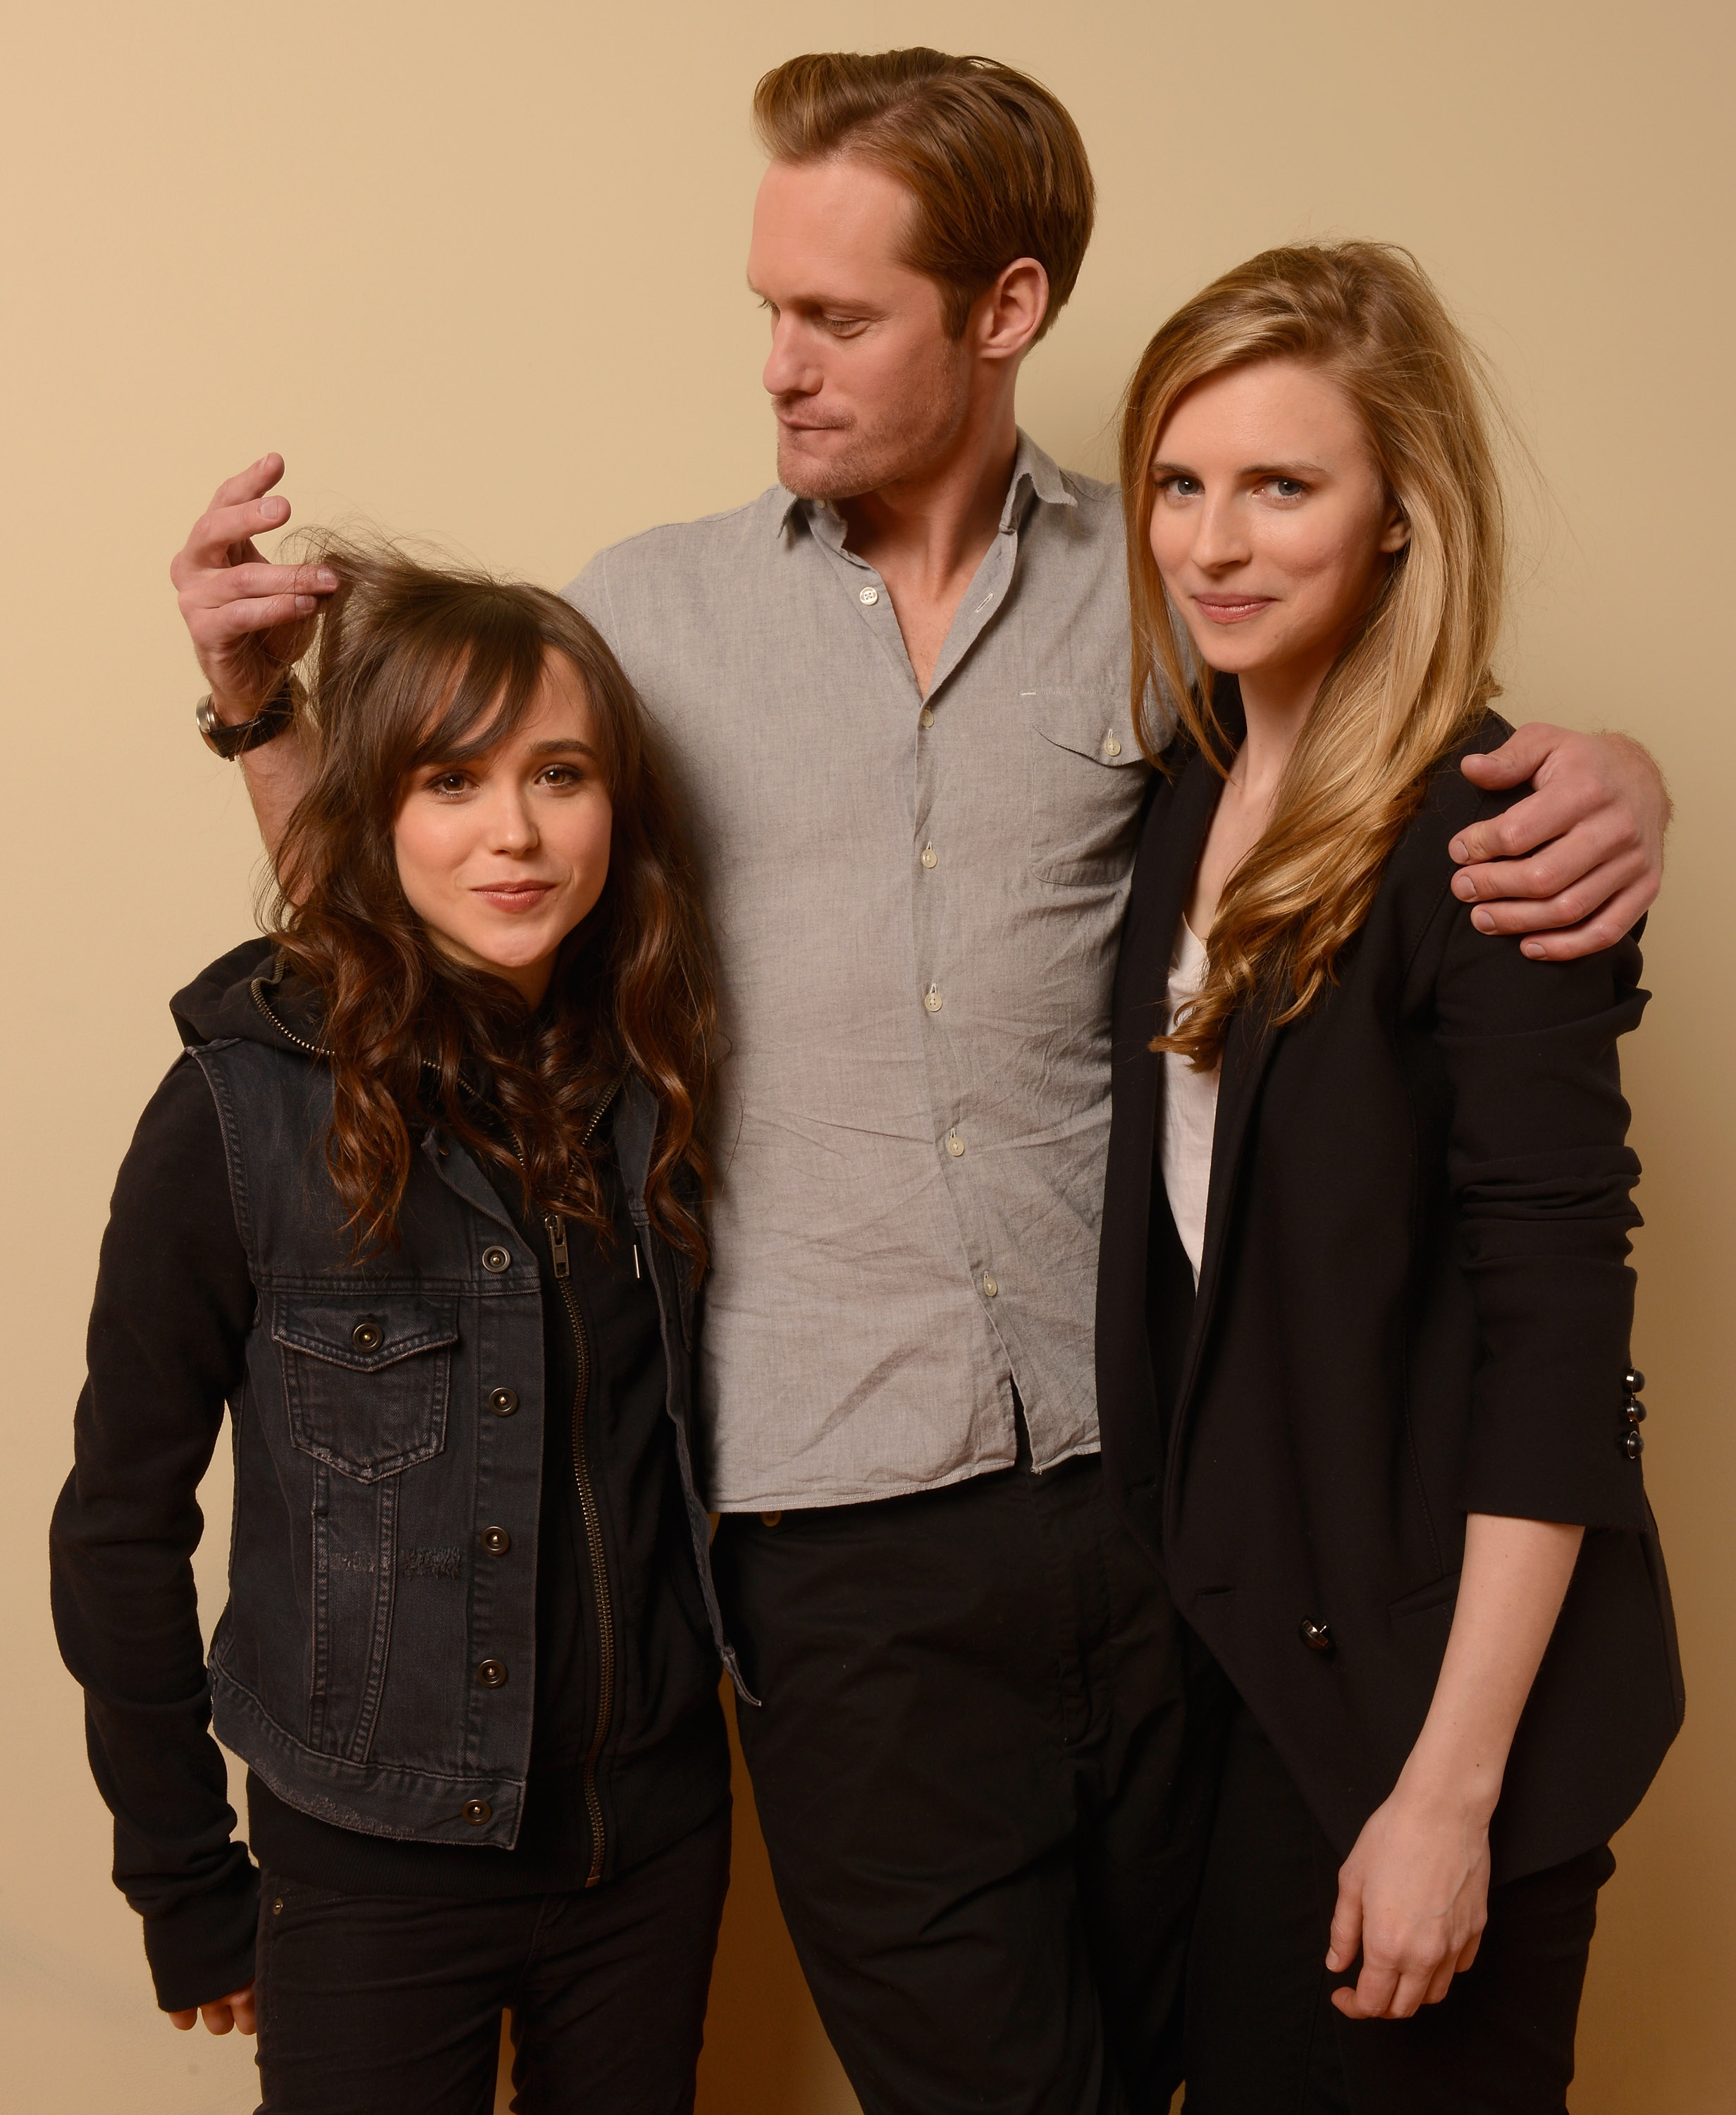 Ellen Page, Alexander Skarsgård and Brit Marling pose for a portrait for the 2013 Sundance Film Festival. This was one of the unused pictures as Skarsgård was goofing around. The 3 starred in a film called The East, and all became friends. Rumors circulated that Skarsgård and Page were an item, which was totally rebuked the following year as Page came out as gay, saying she has been gay as long as she can remember.